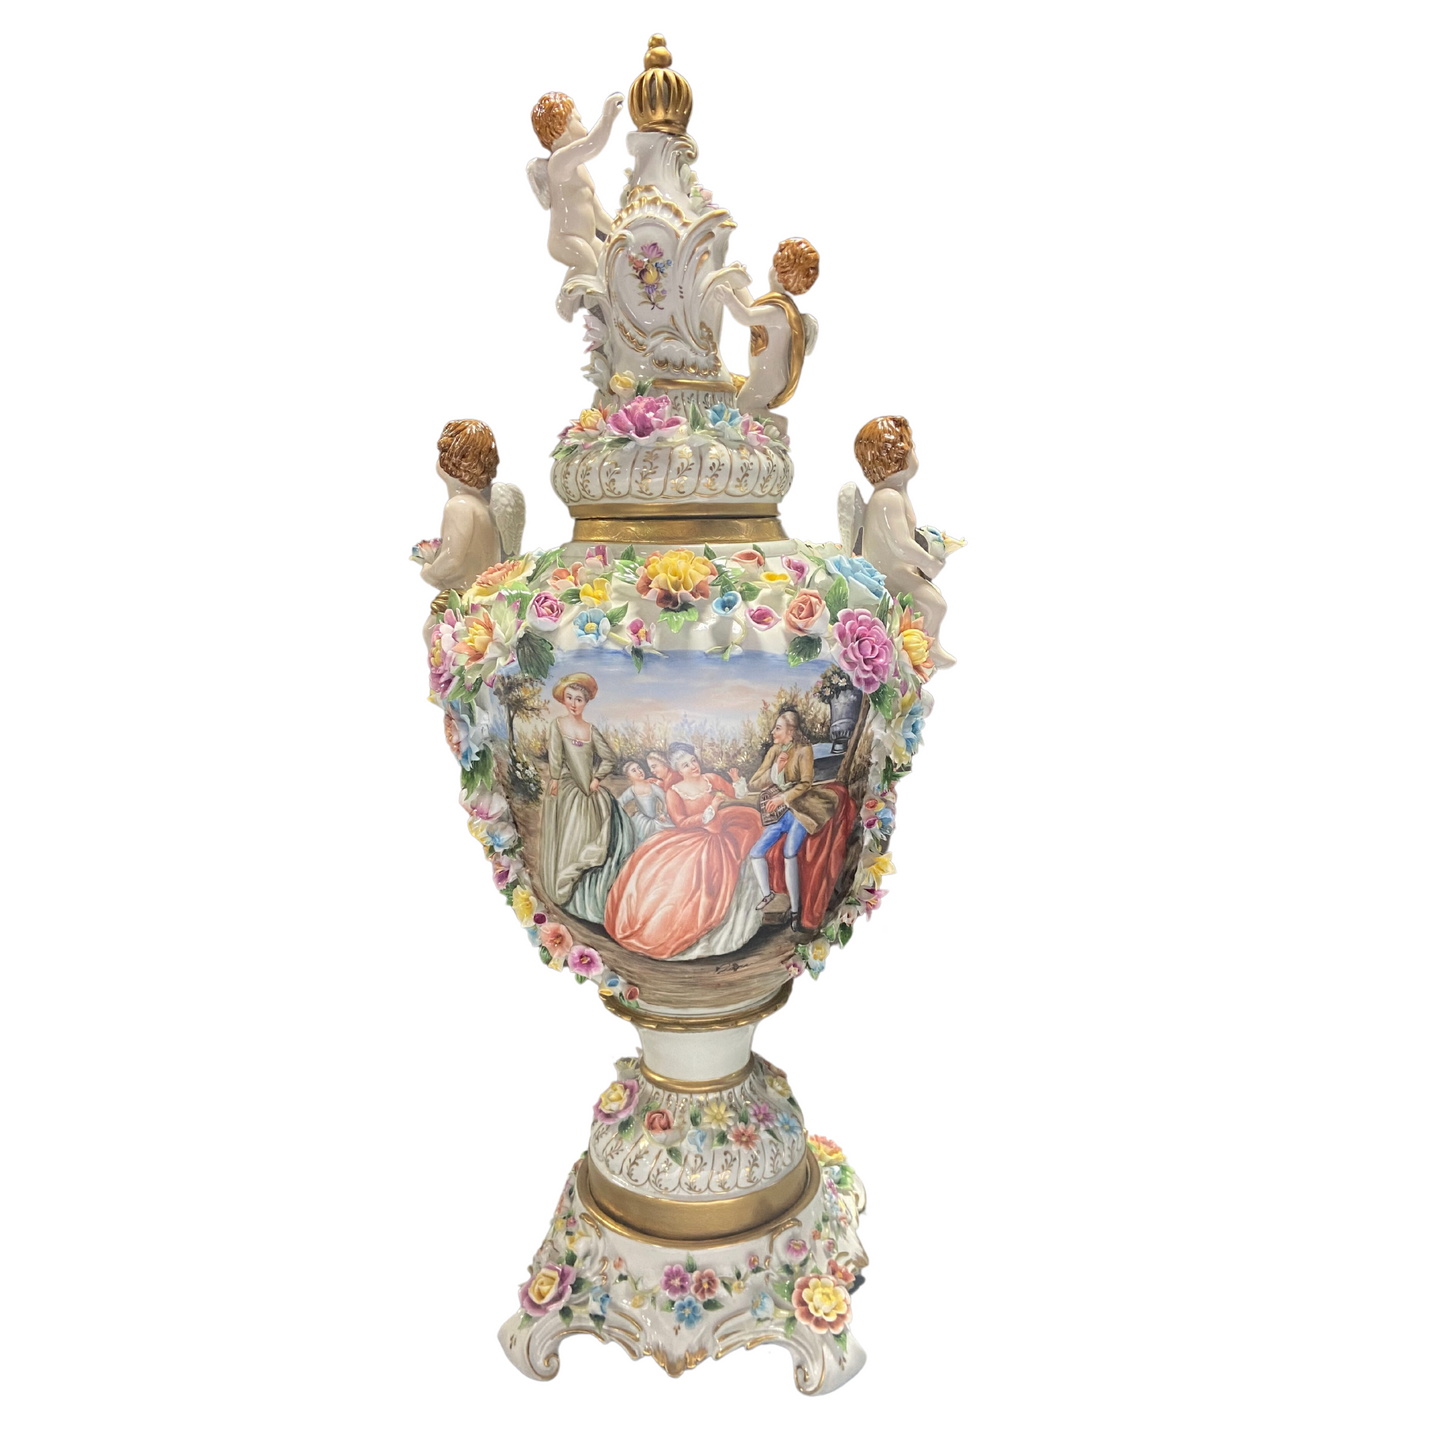 Hand-painted Rococo Three Dimensional Porcelain Flower Urn